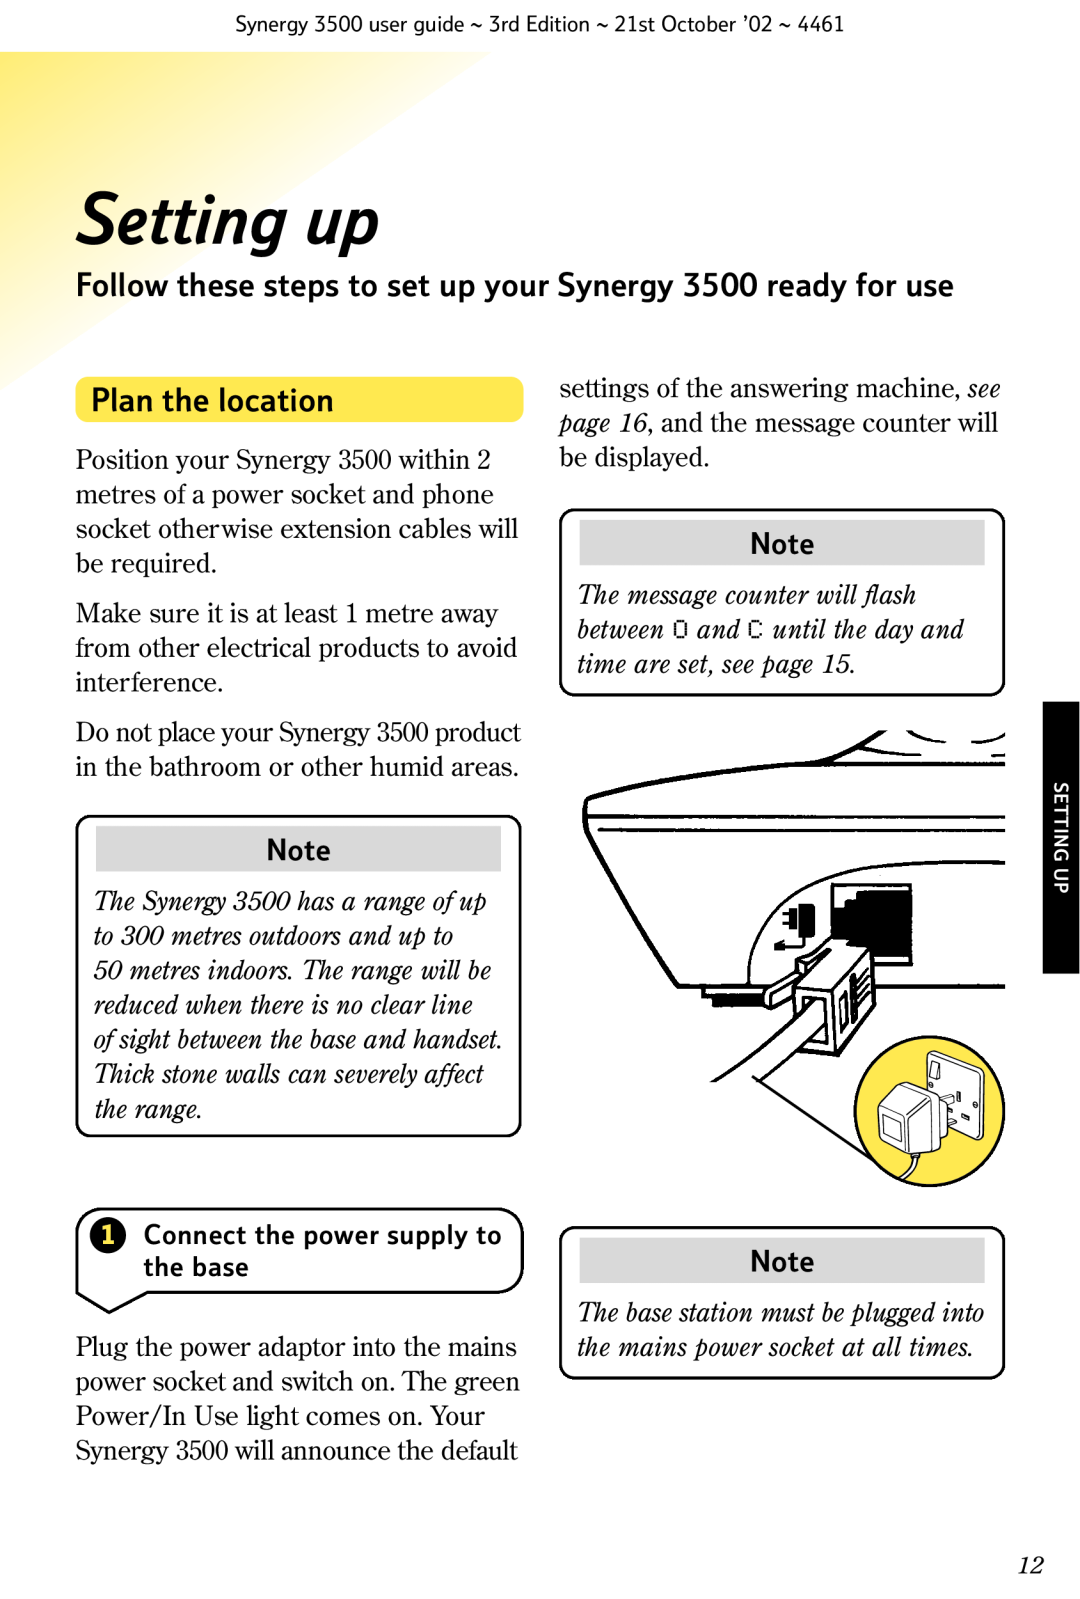 BT manual Setting up, Follow these steps to set up your Synergy 3500 ready for use, Plan the location 